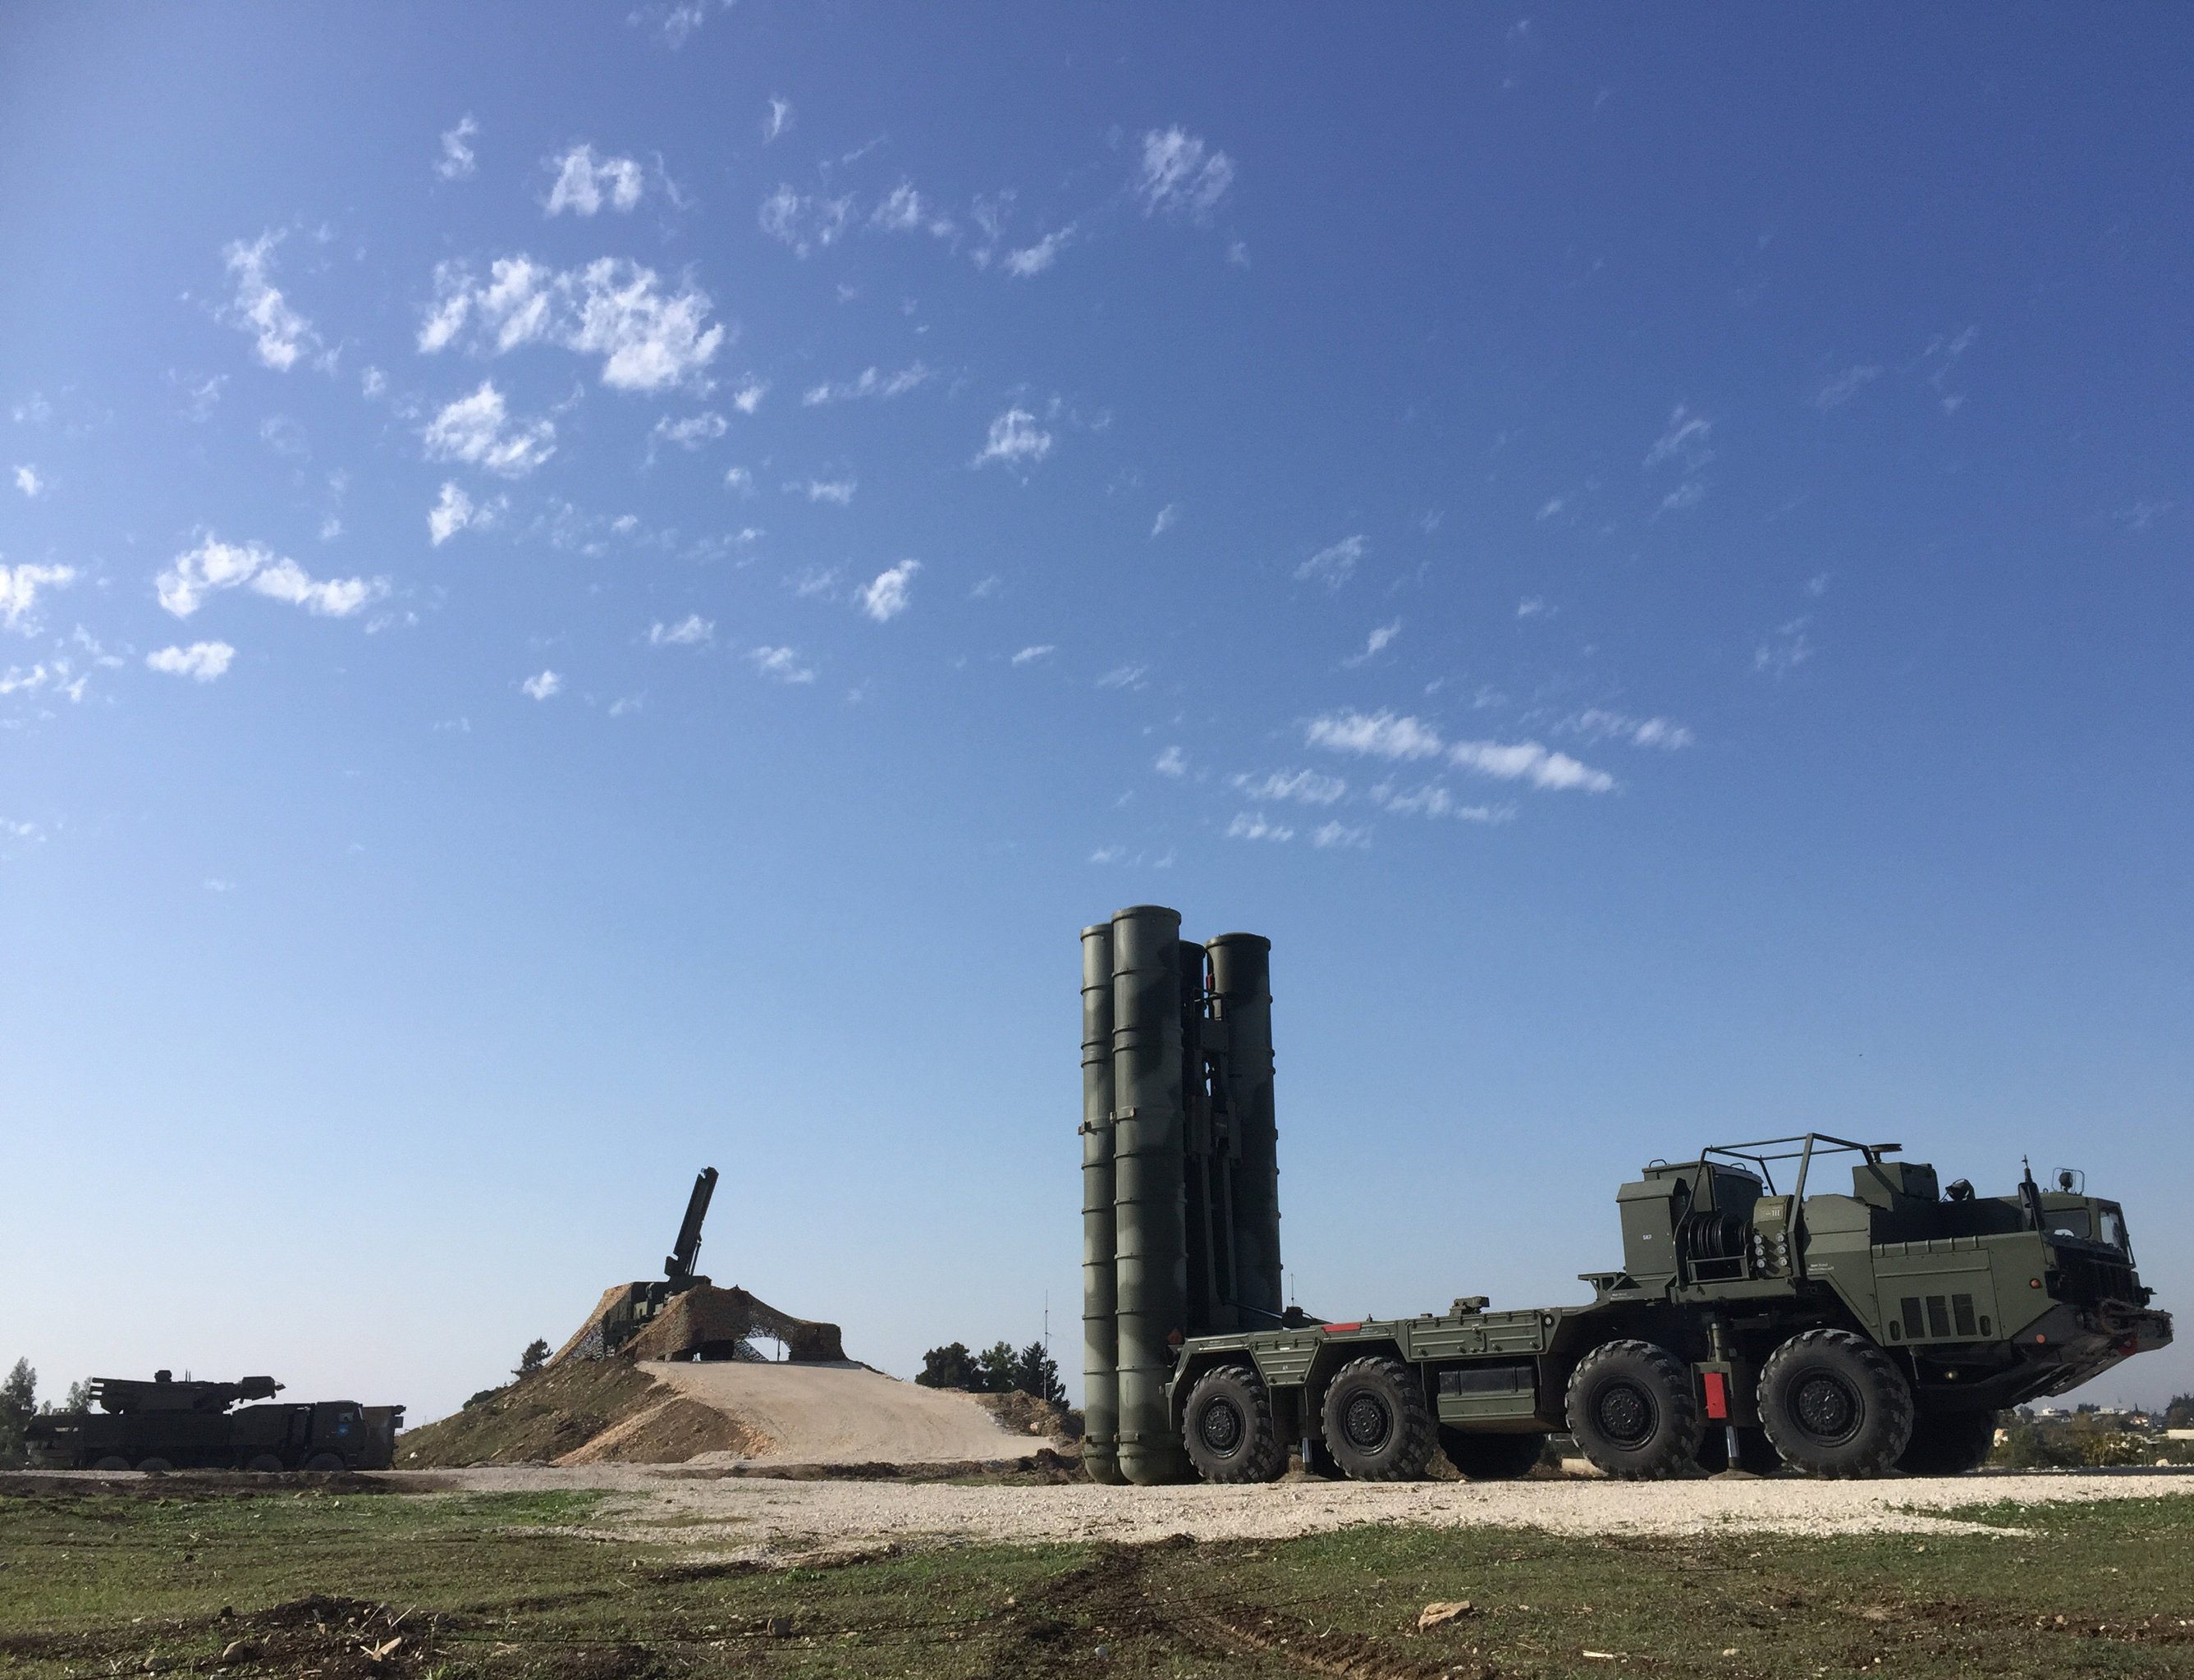 An S-400 air defence missile battery deployed for combat duty at the Hmeymim airbase to provide security of the Russian air group's flights in Syria.